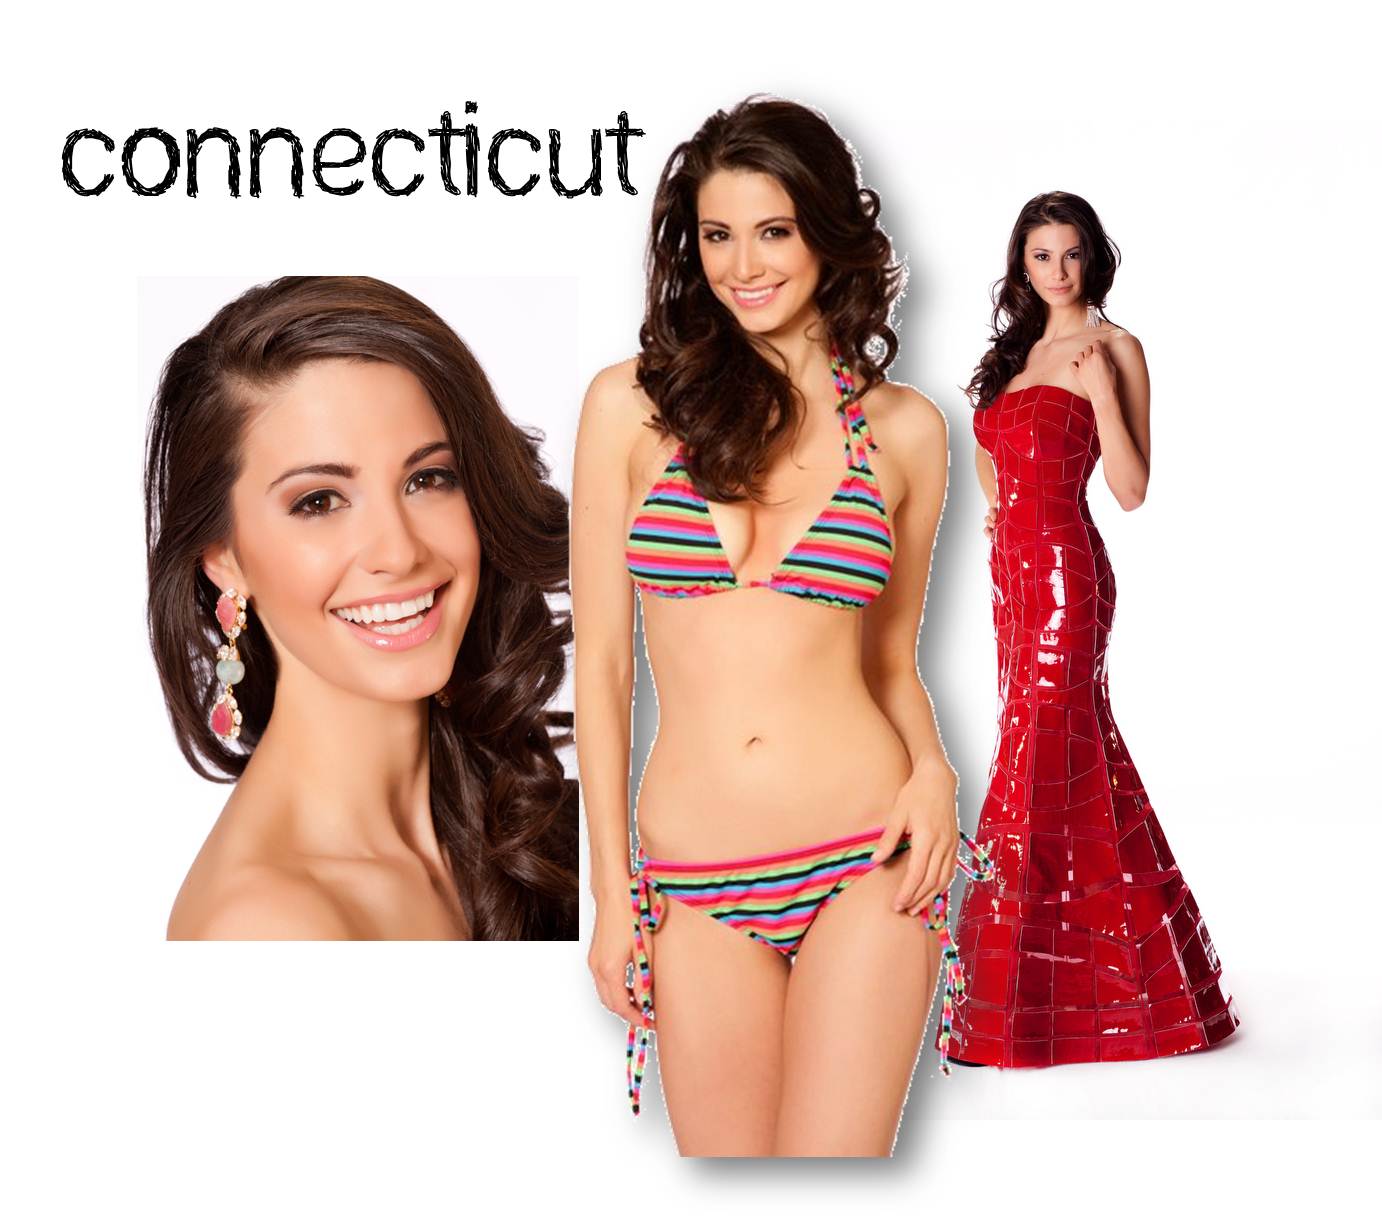 Just Me: Miss USA 2011 - Second Update